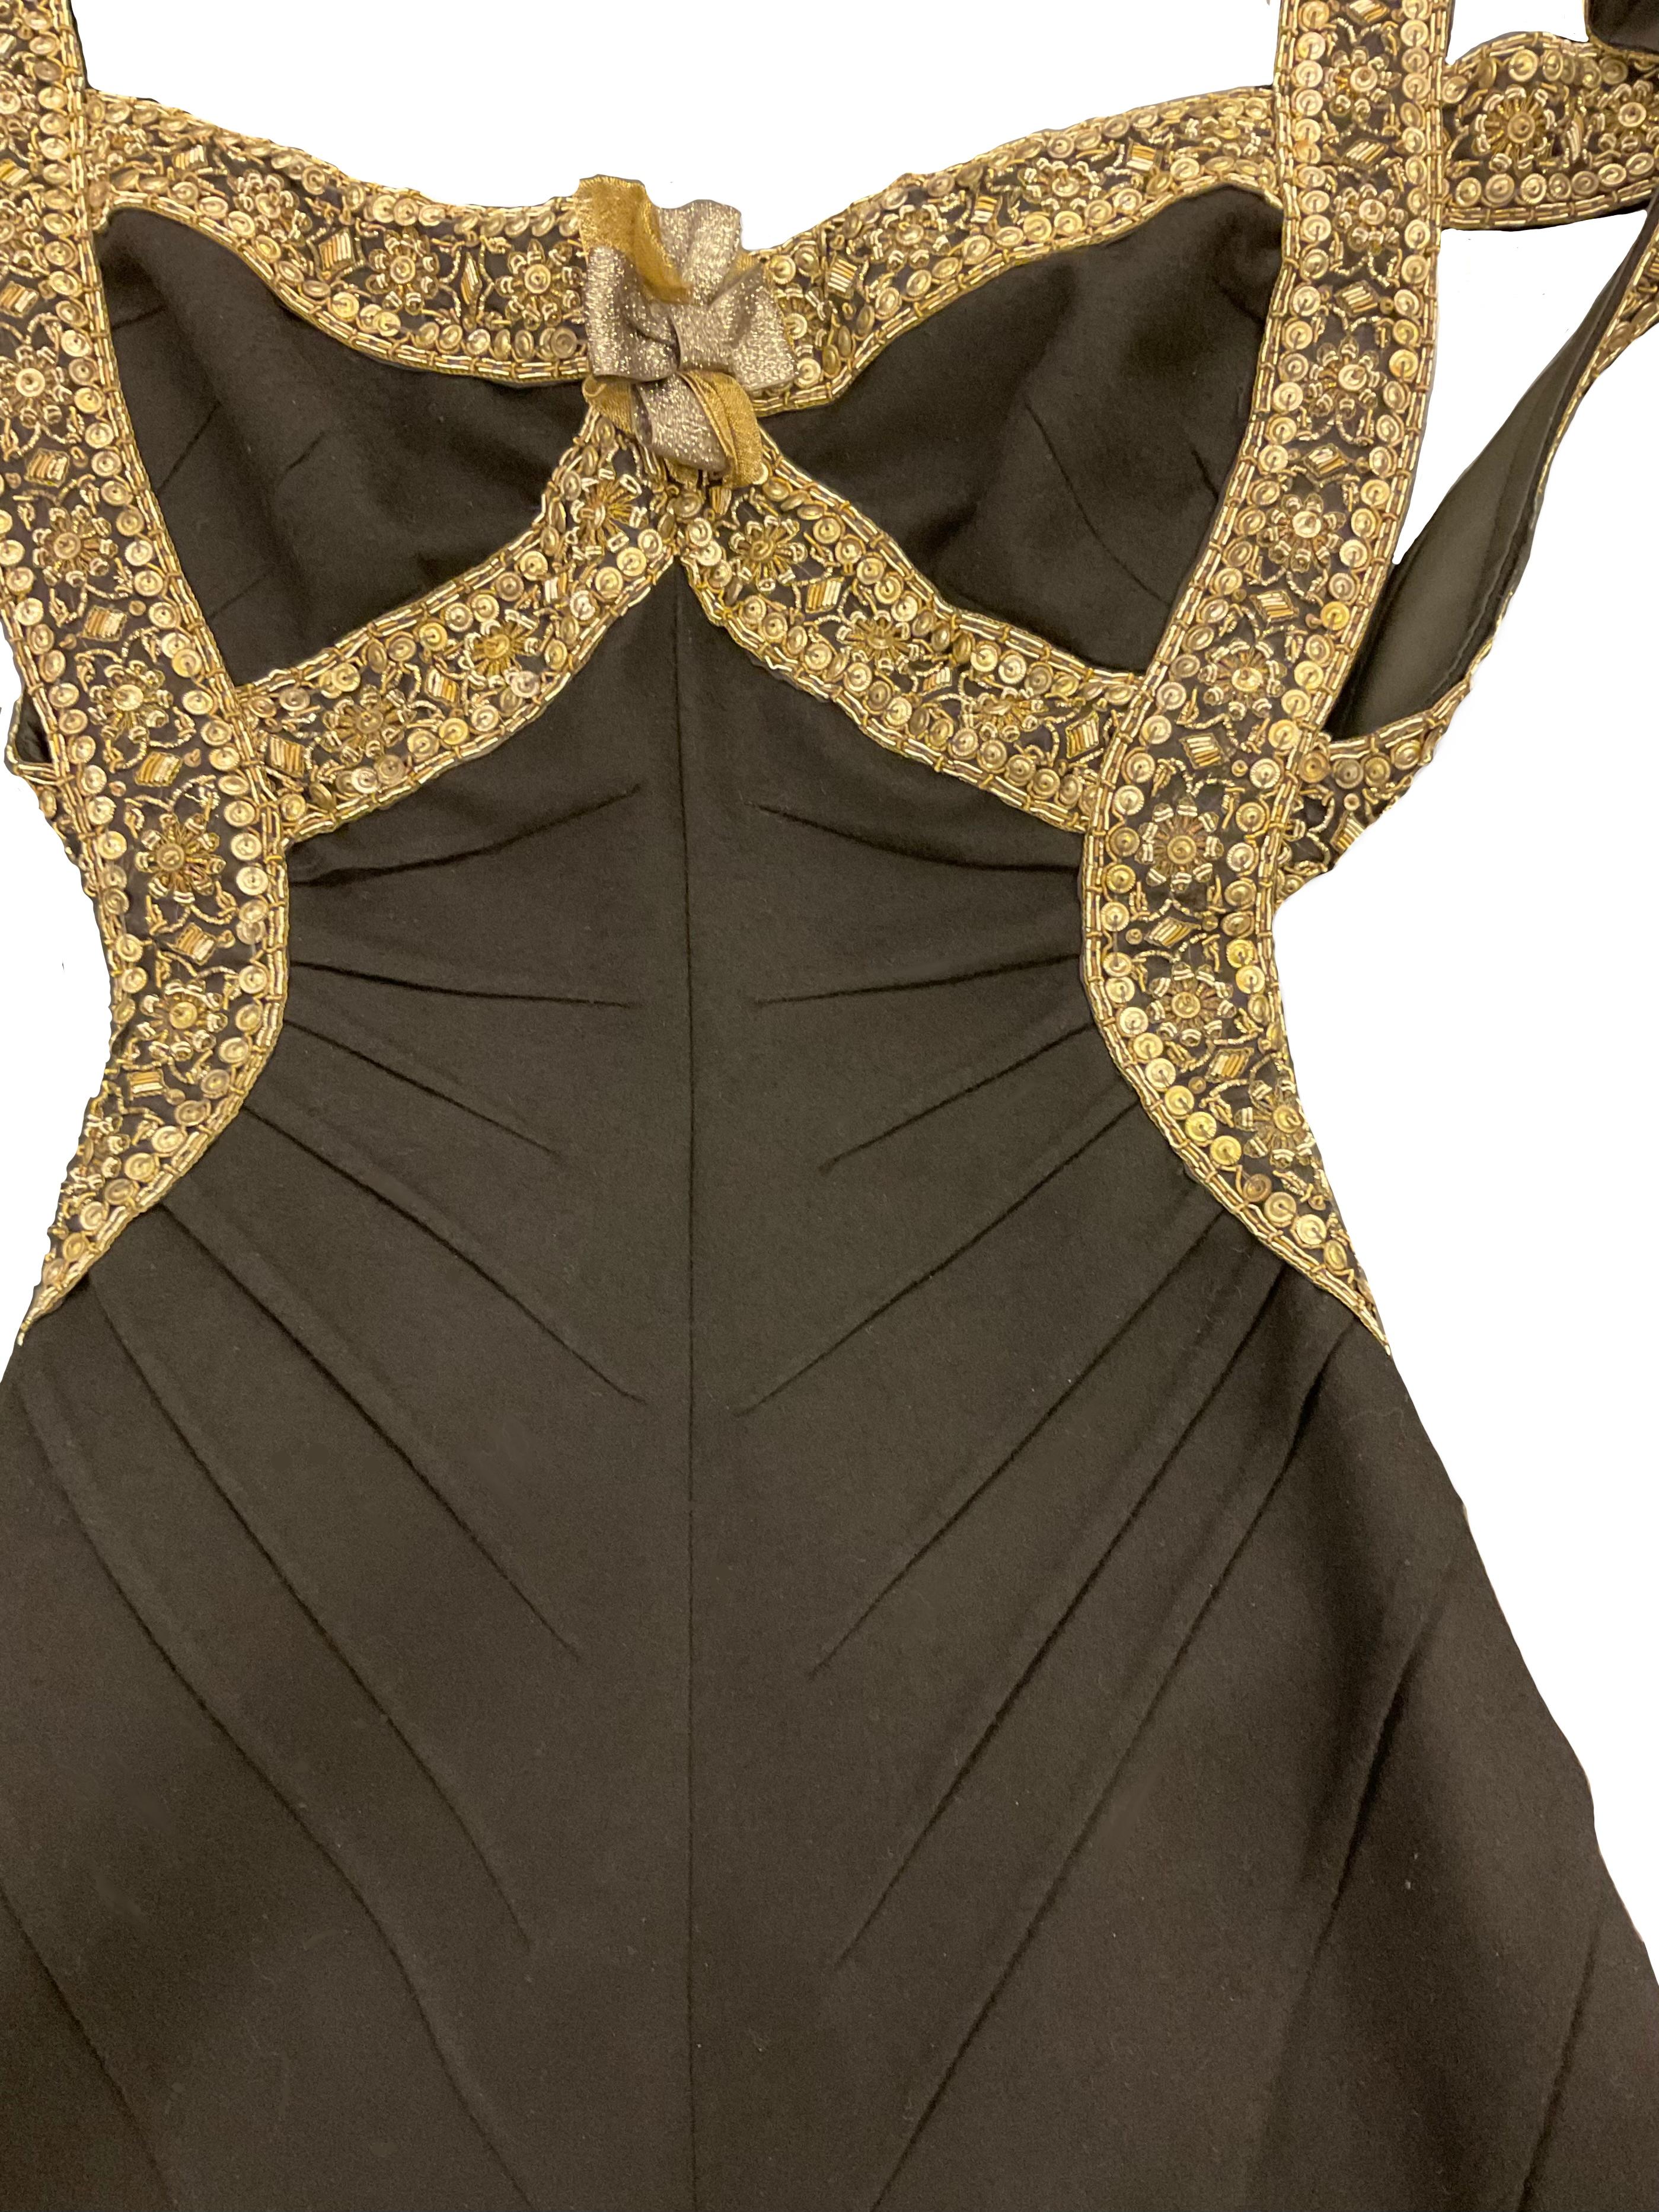 ALEXANDER McQUEEN Black dress with slip neckline, wool with embroidery  For Sale 6